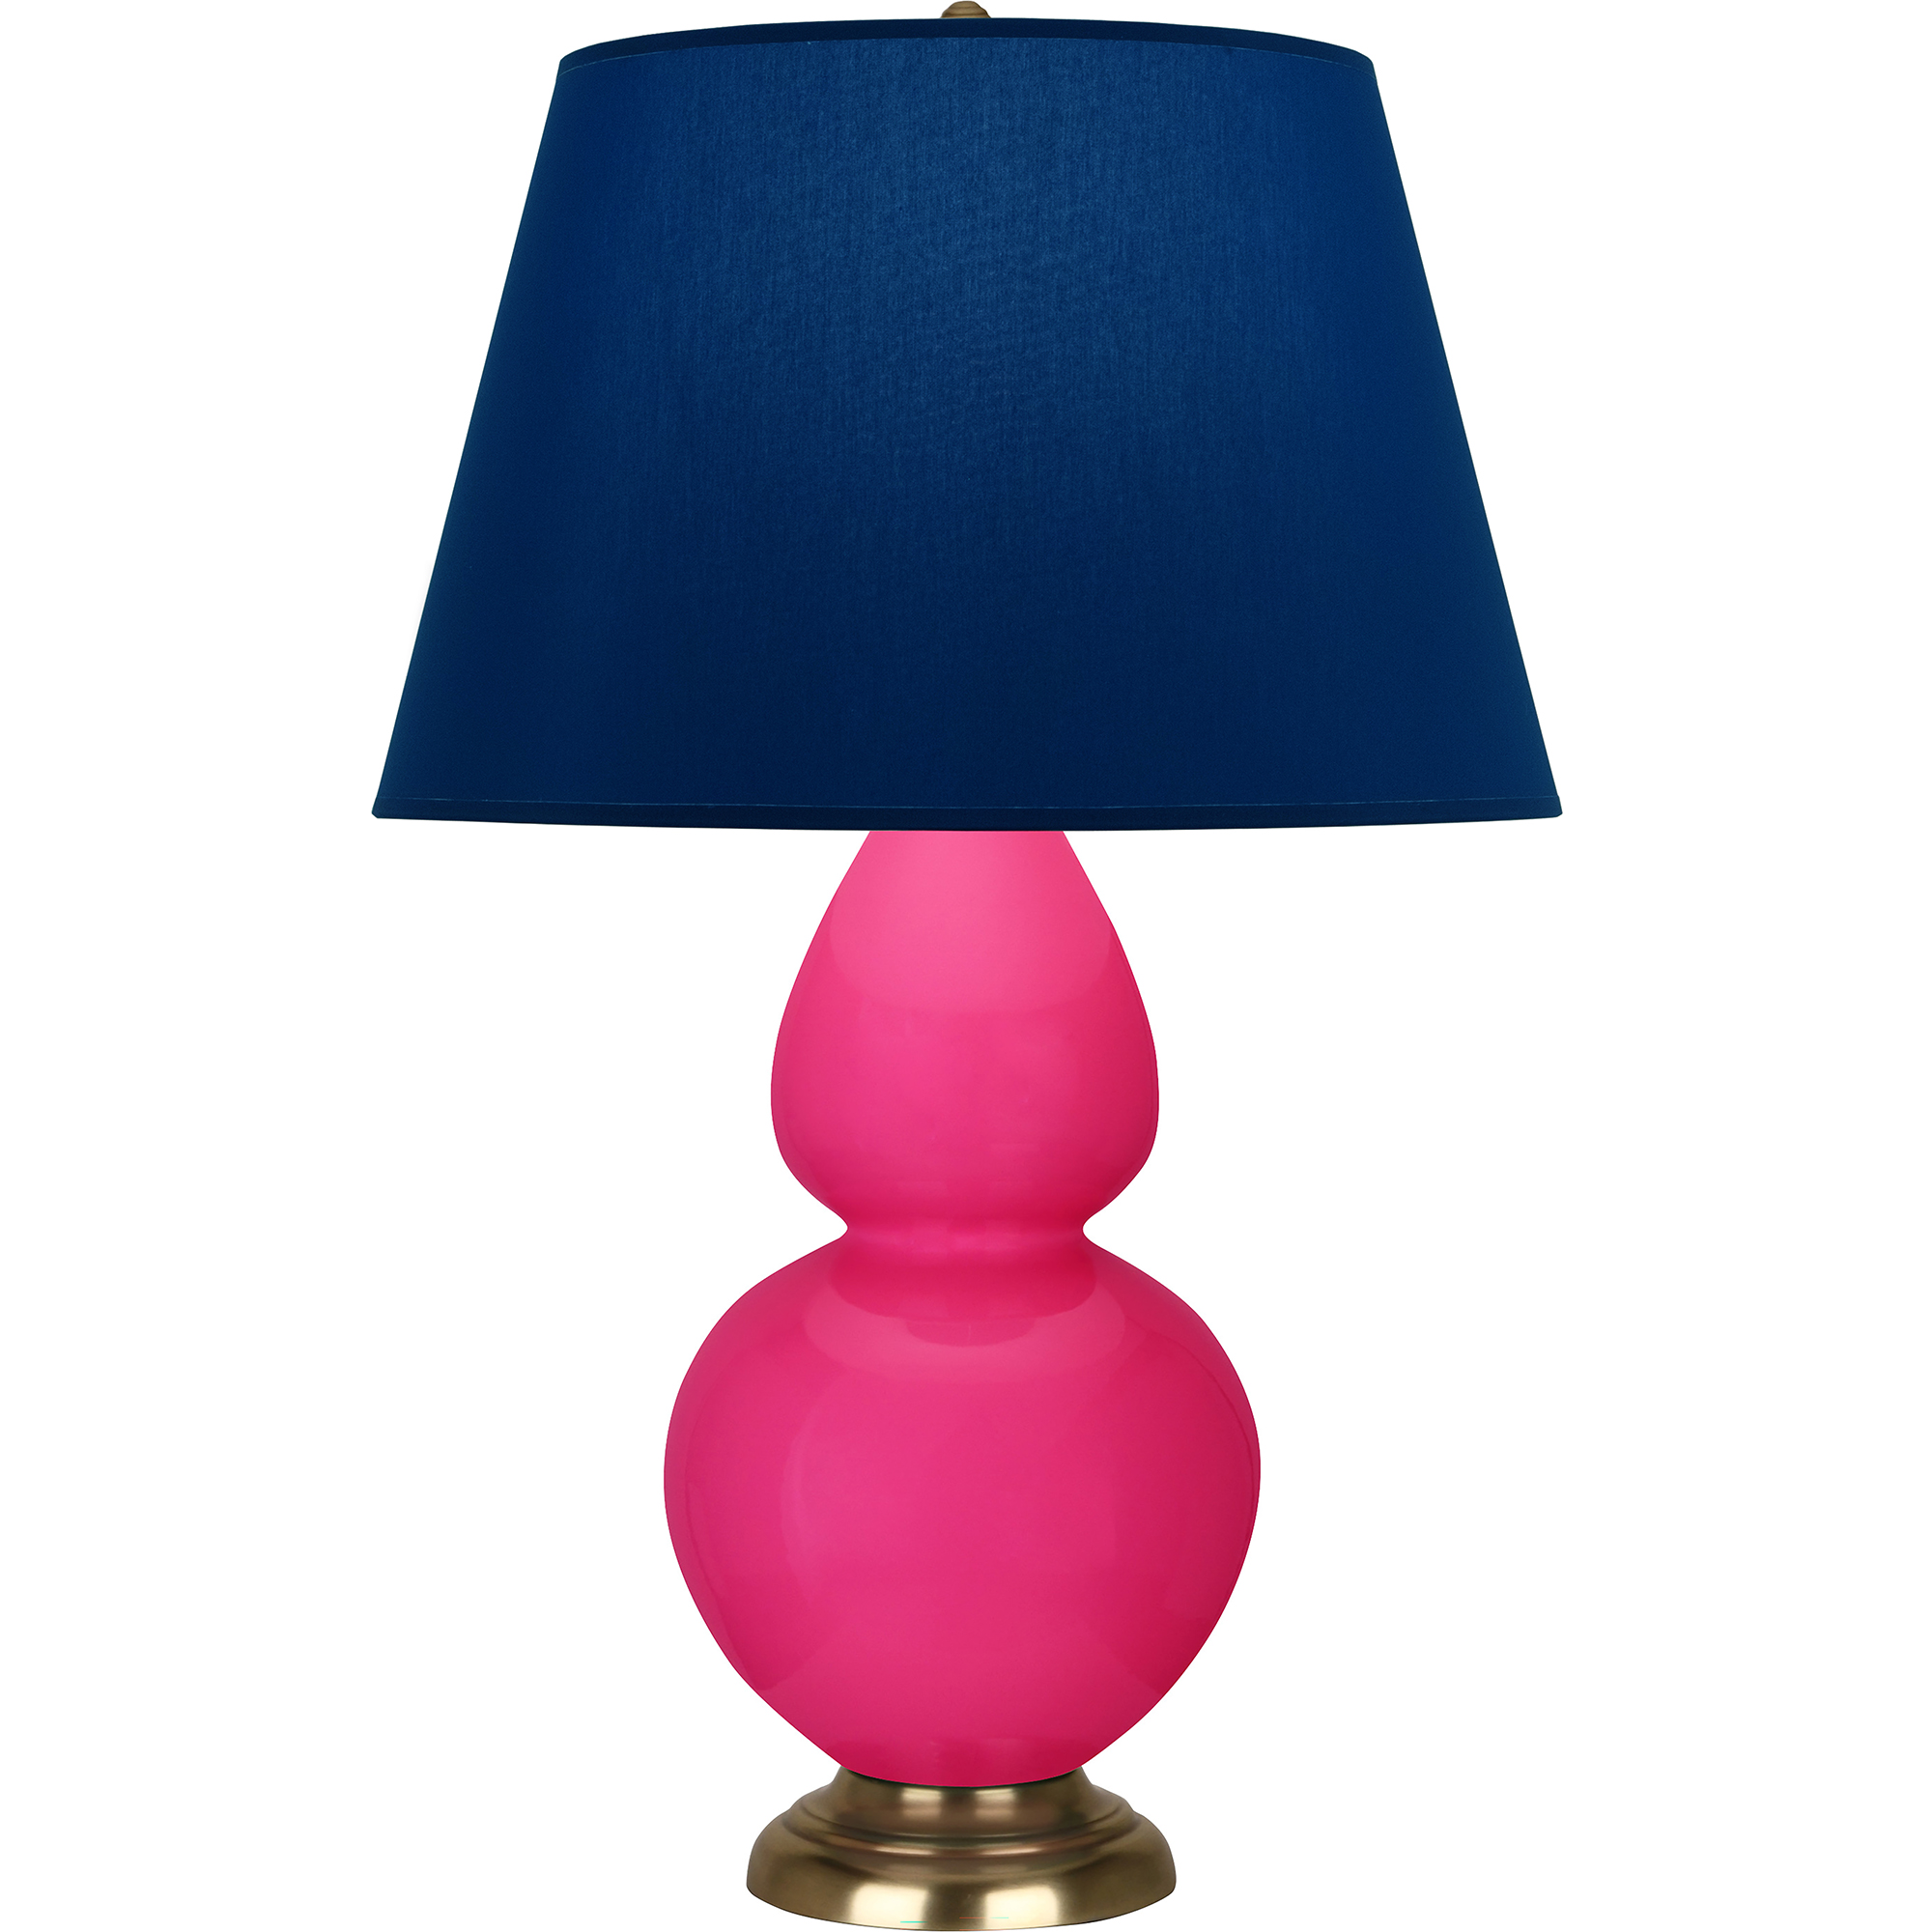 Double Gourd Table Lamp Style #RZ20N